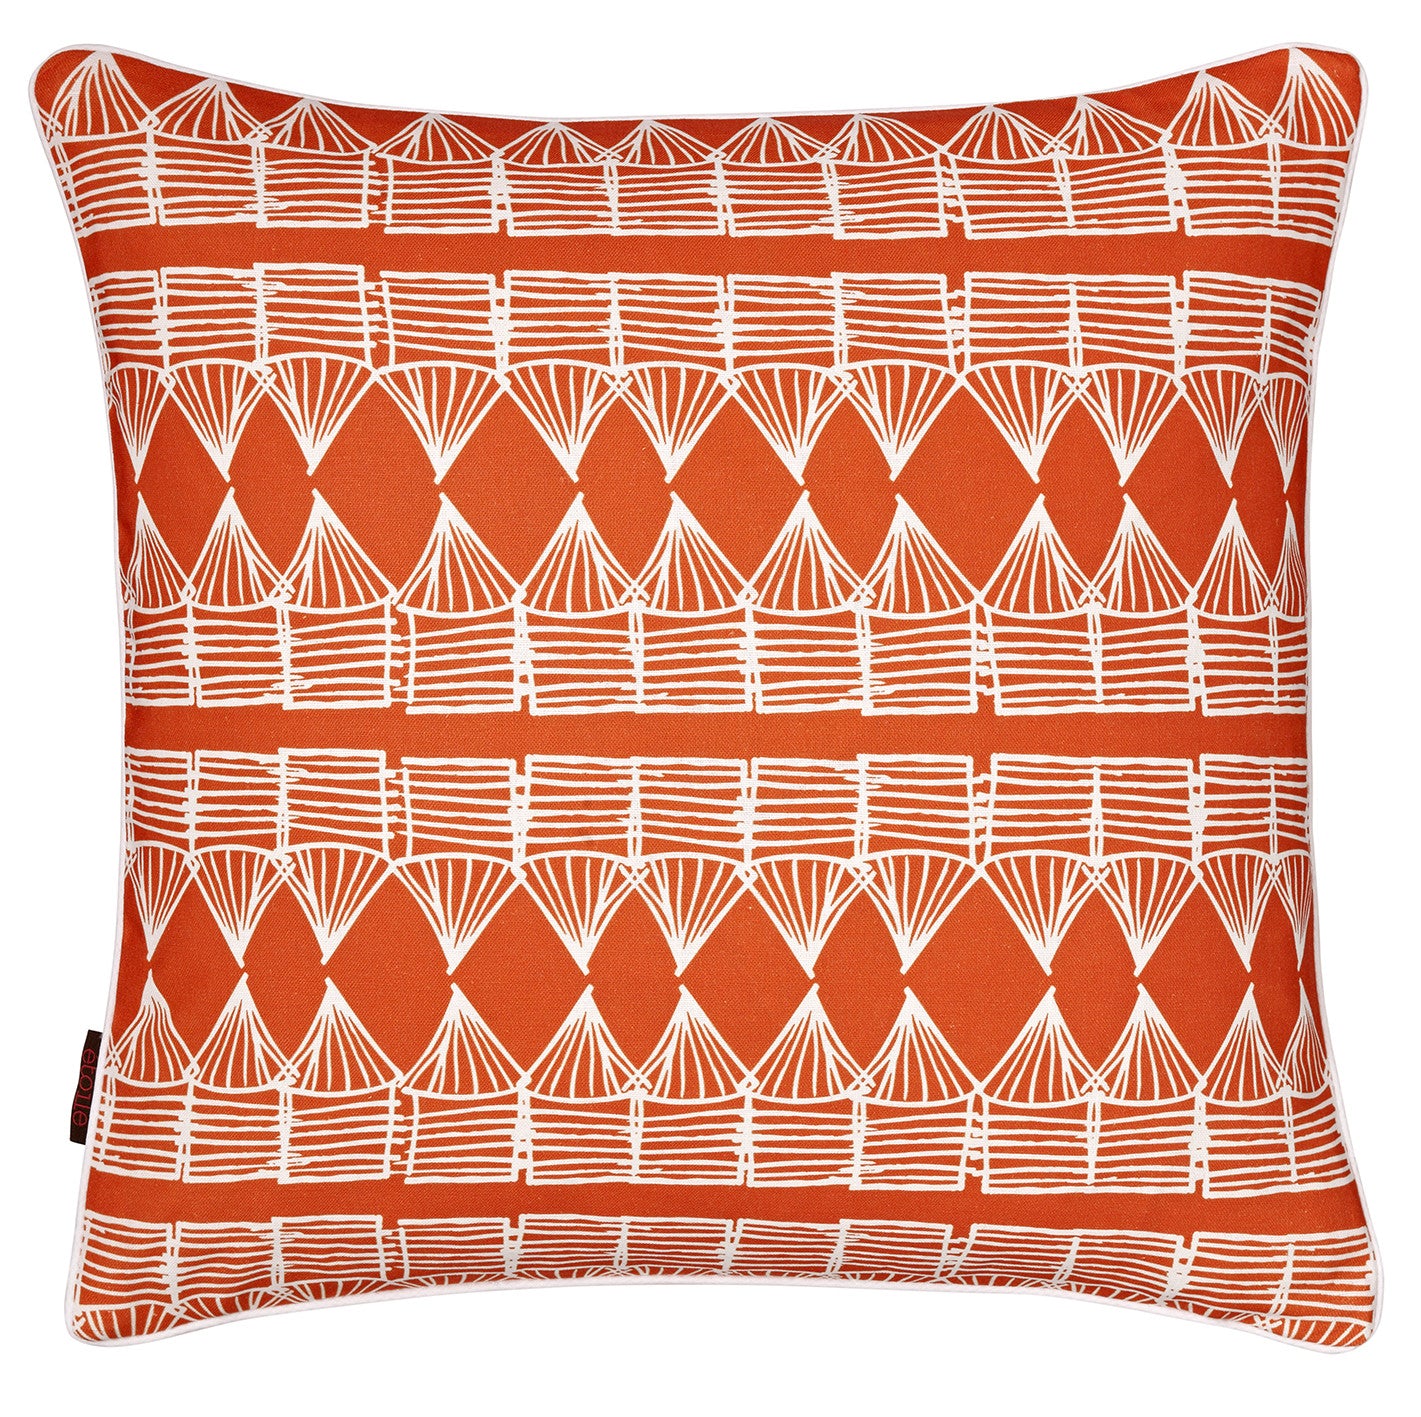 Tiki Huts Tropical Pattern Cotton Linen throw pillow Cushion 45x45cm in Bright Pumpkin Orange ships from Canada worldwide including the USA